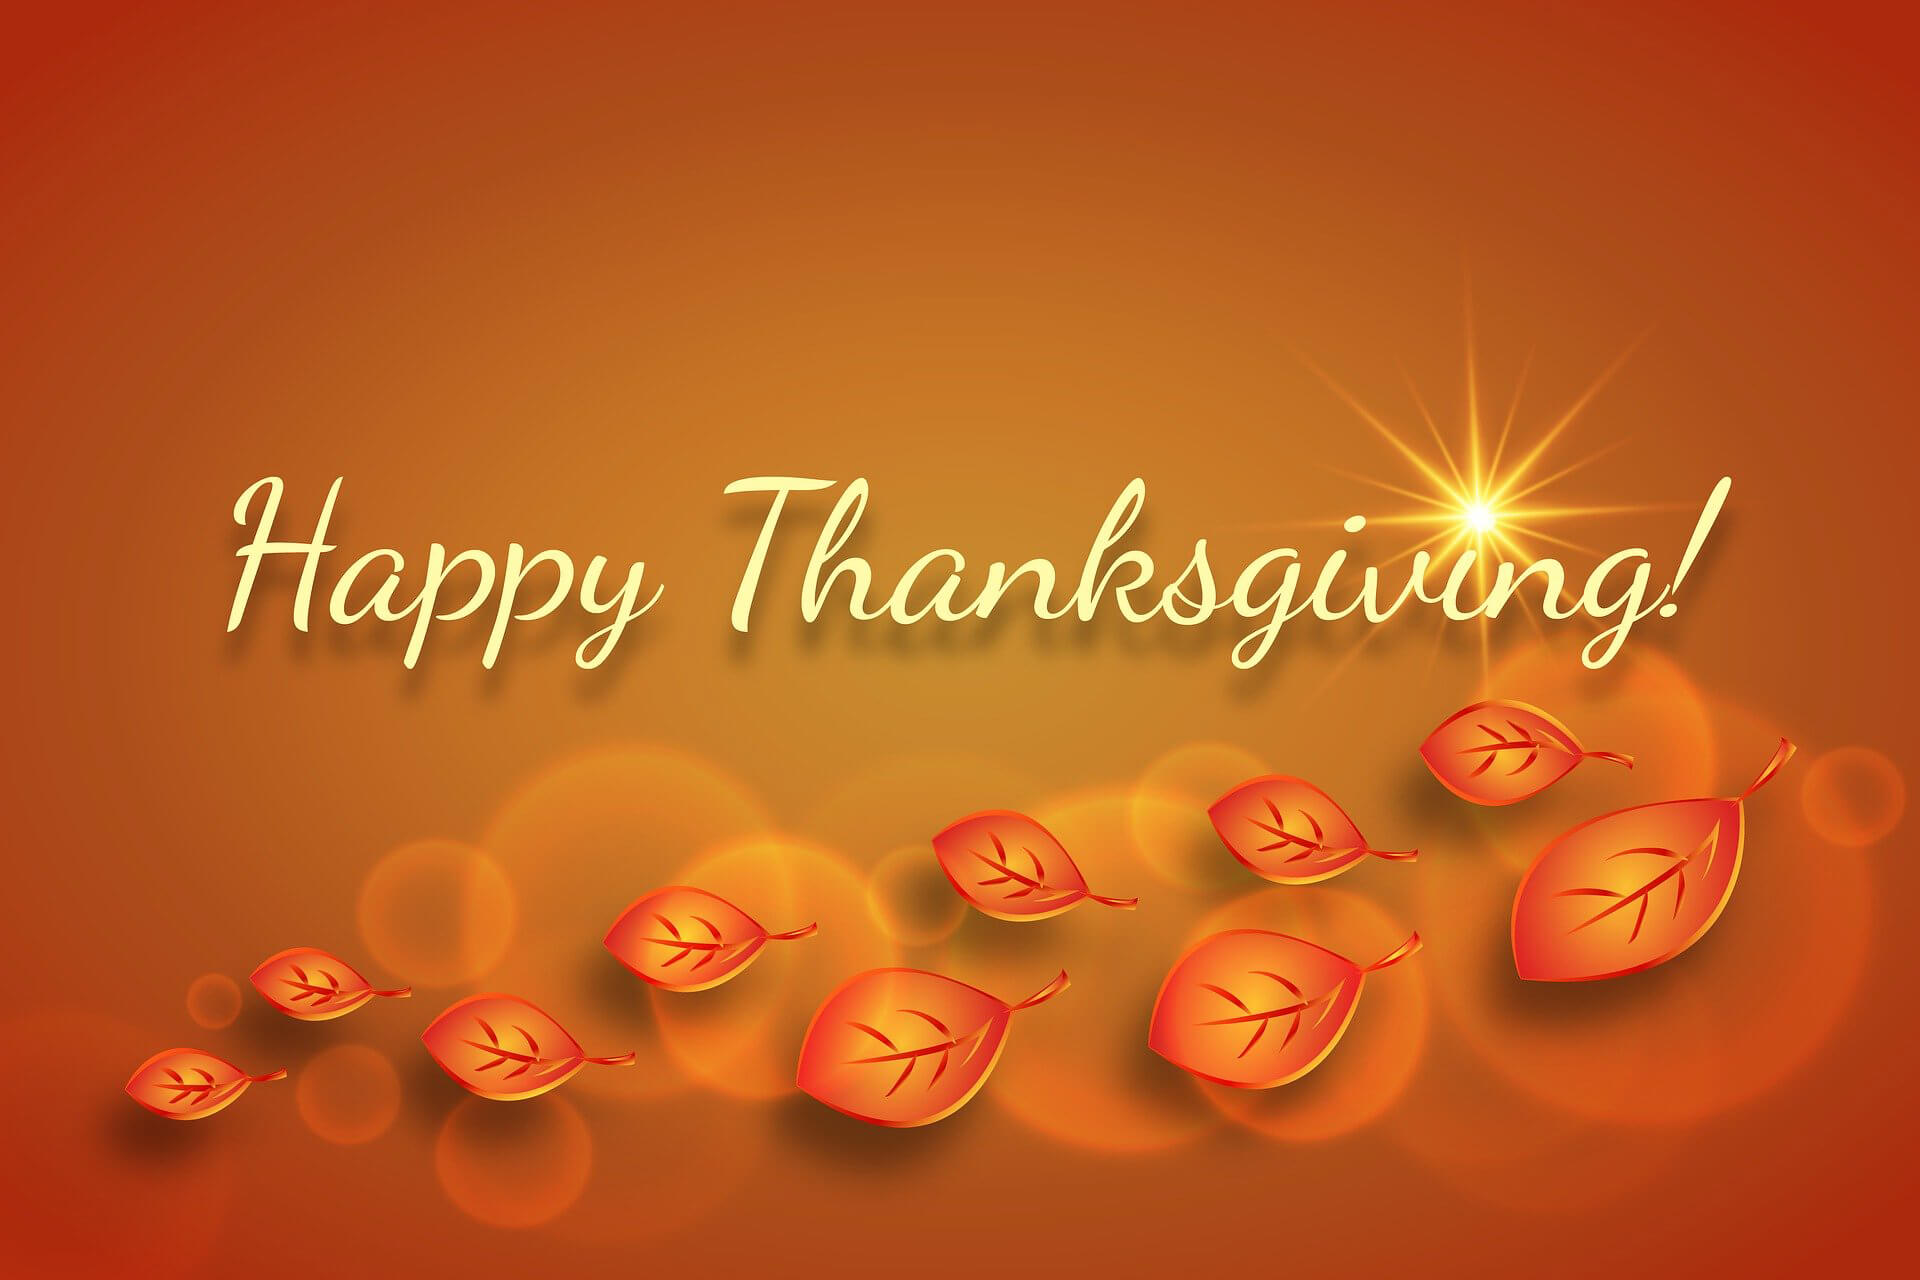 Happy Thanksgiving from Security Specialists, Security Specialists Closed for Holiday, happy Thanksgiving 2019, Security Specialists Thanksgiving 2019, Stamford Thanksgiving, Connecticut Thanksgiving, access control, video surveillance, security specialists access control, fire detection systems, security specialists fire detection, commercial fire protection systems, KIDDE strategic partner.